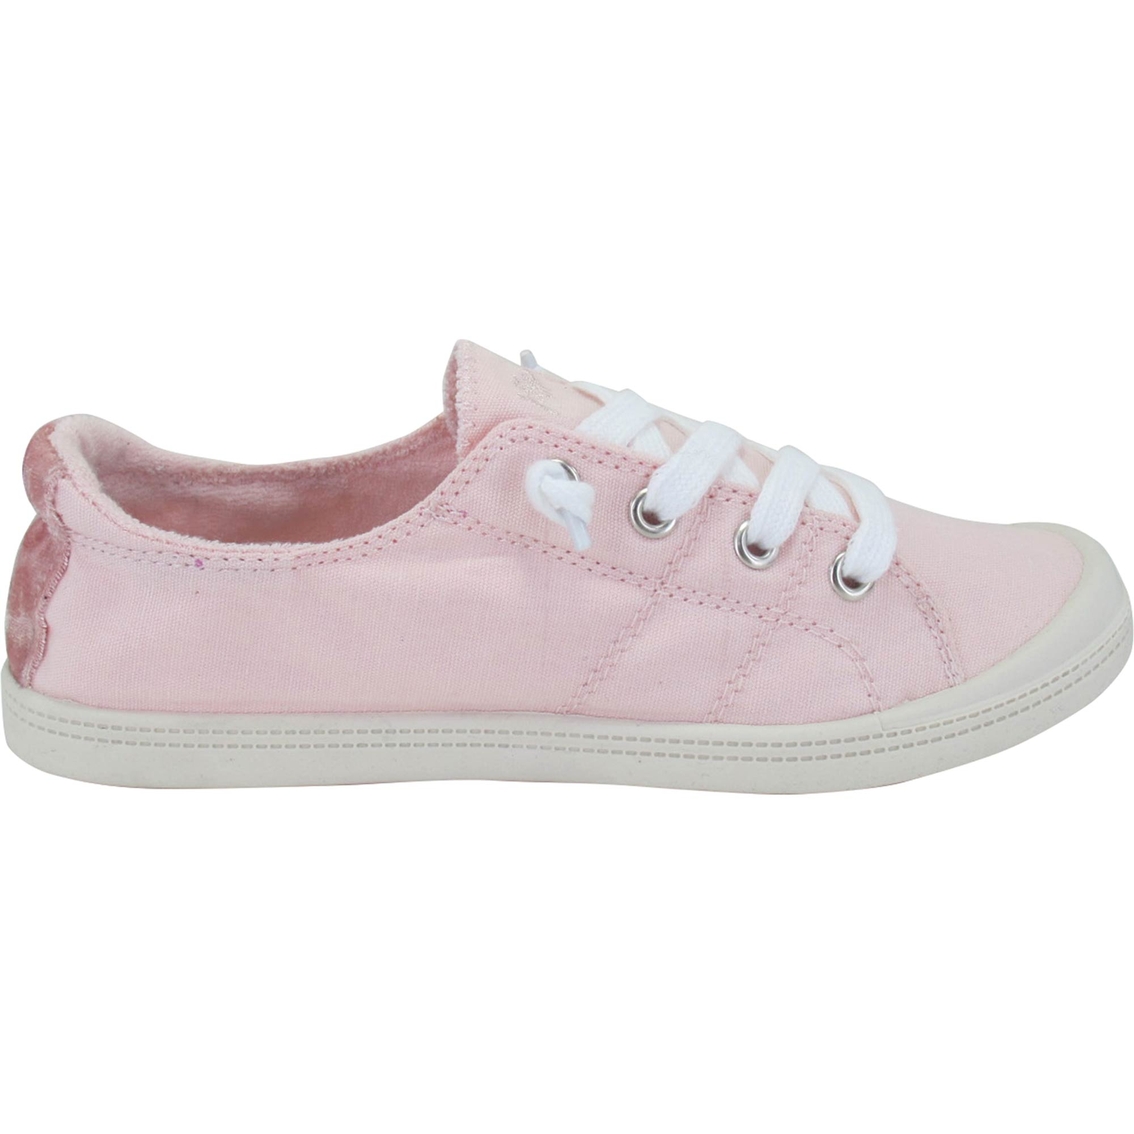 Jellypop Dallas Lace Up Sneakers | Sneakers | Shoes | Shop The Exchange